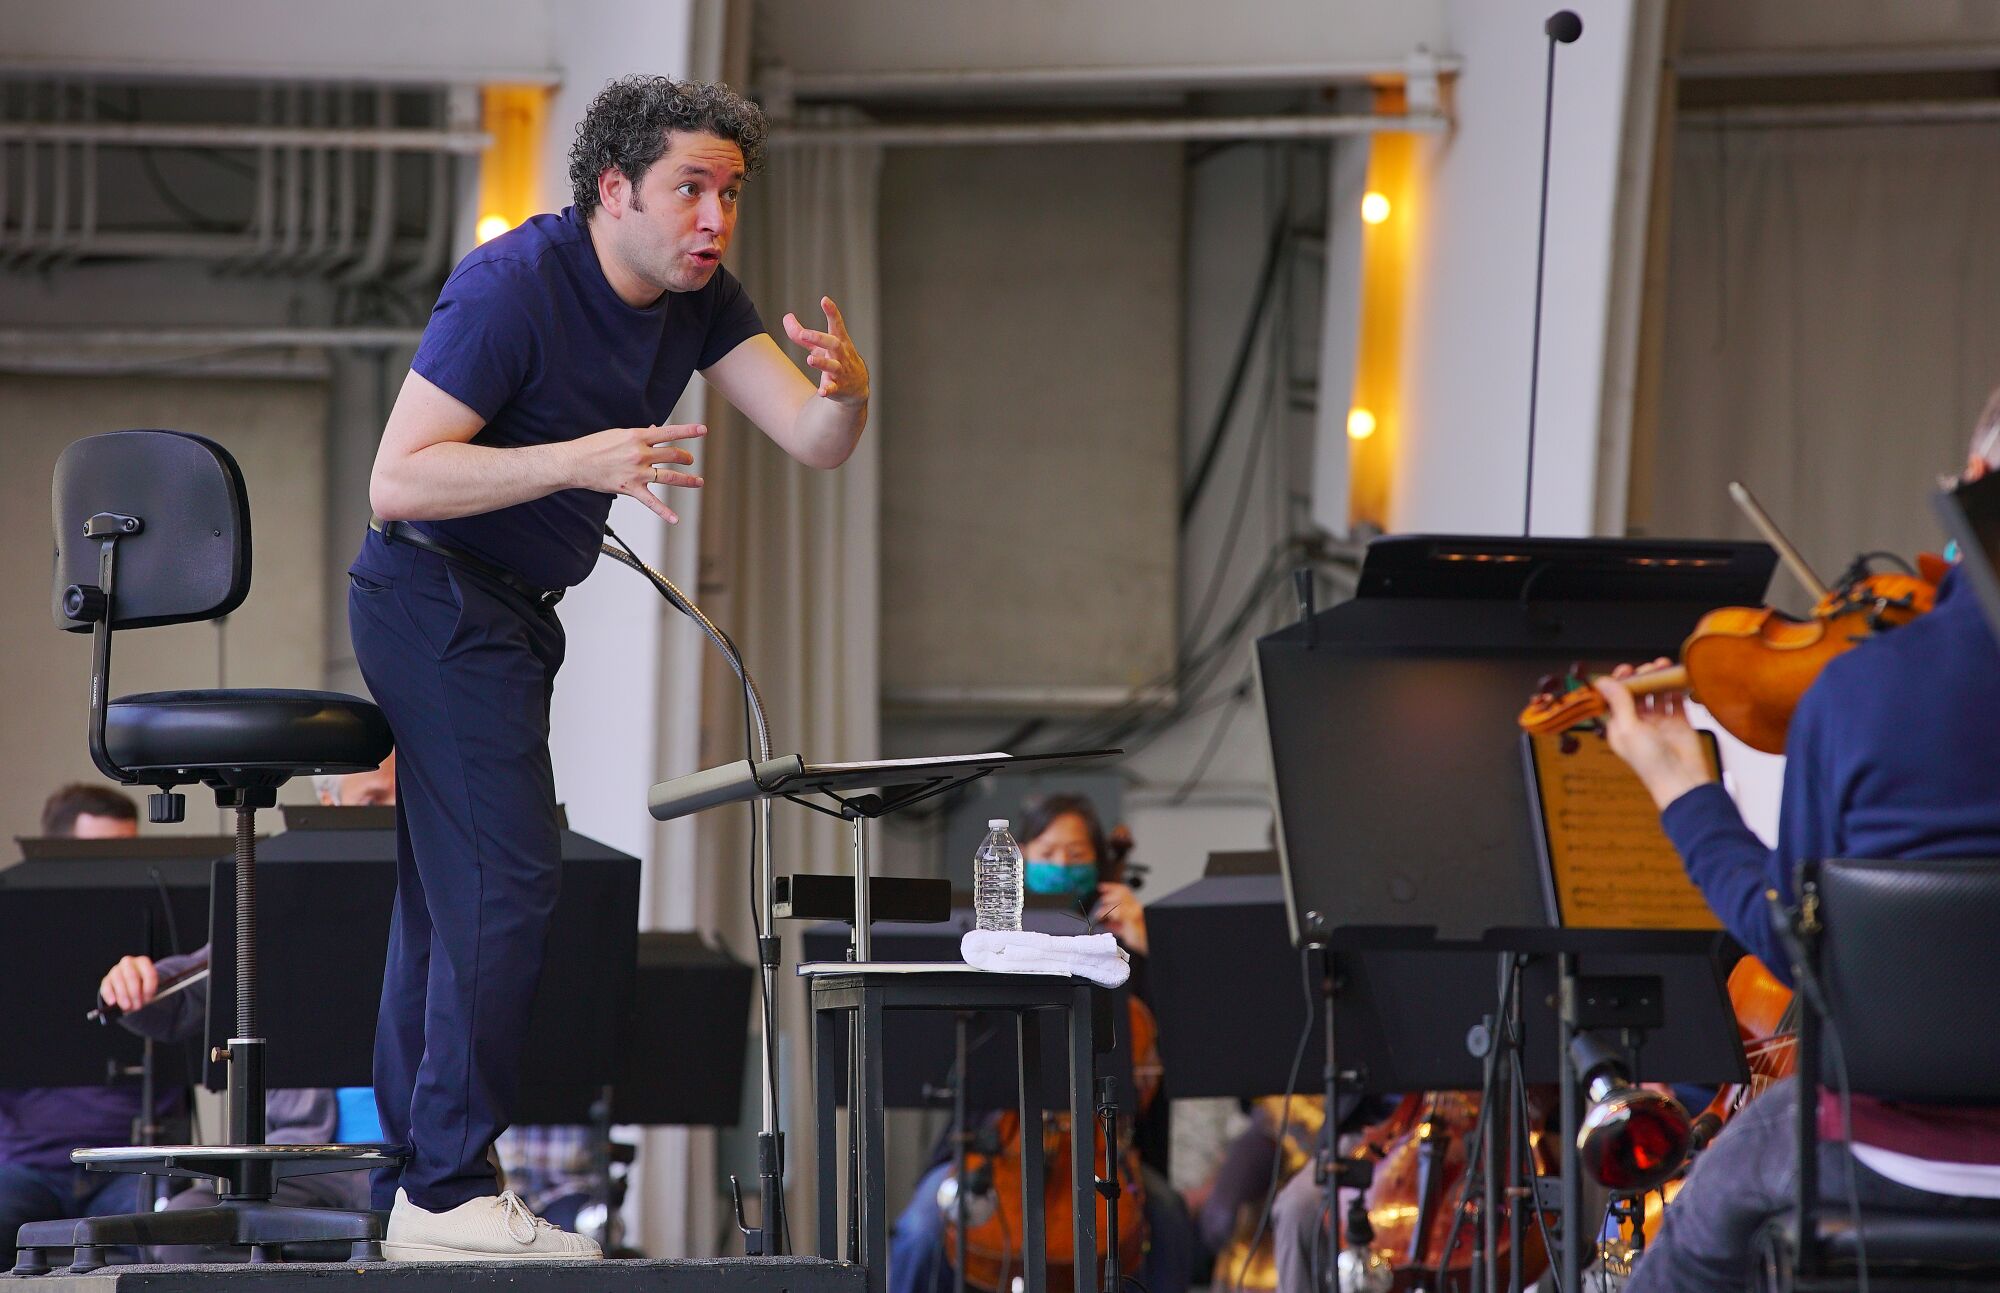 Dudamel gestures as he conducts rehearsal